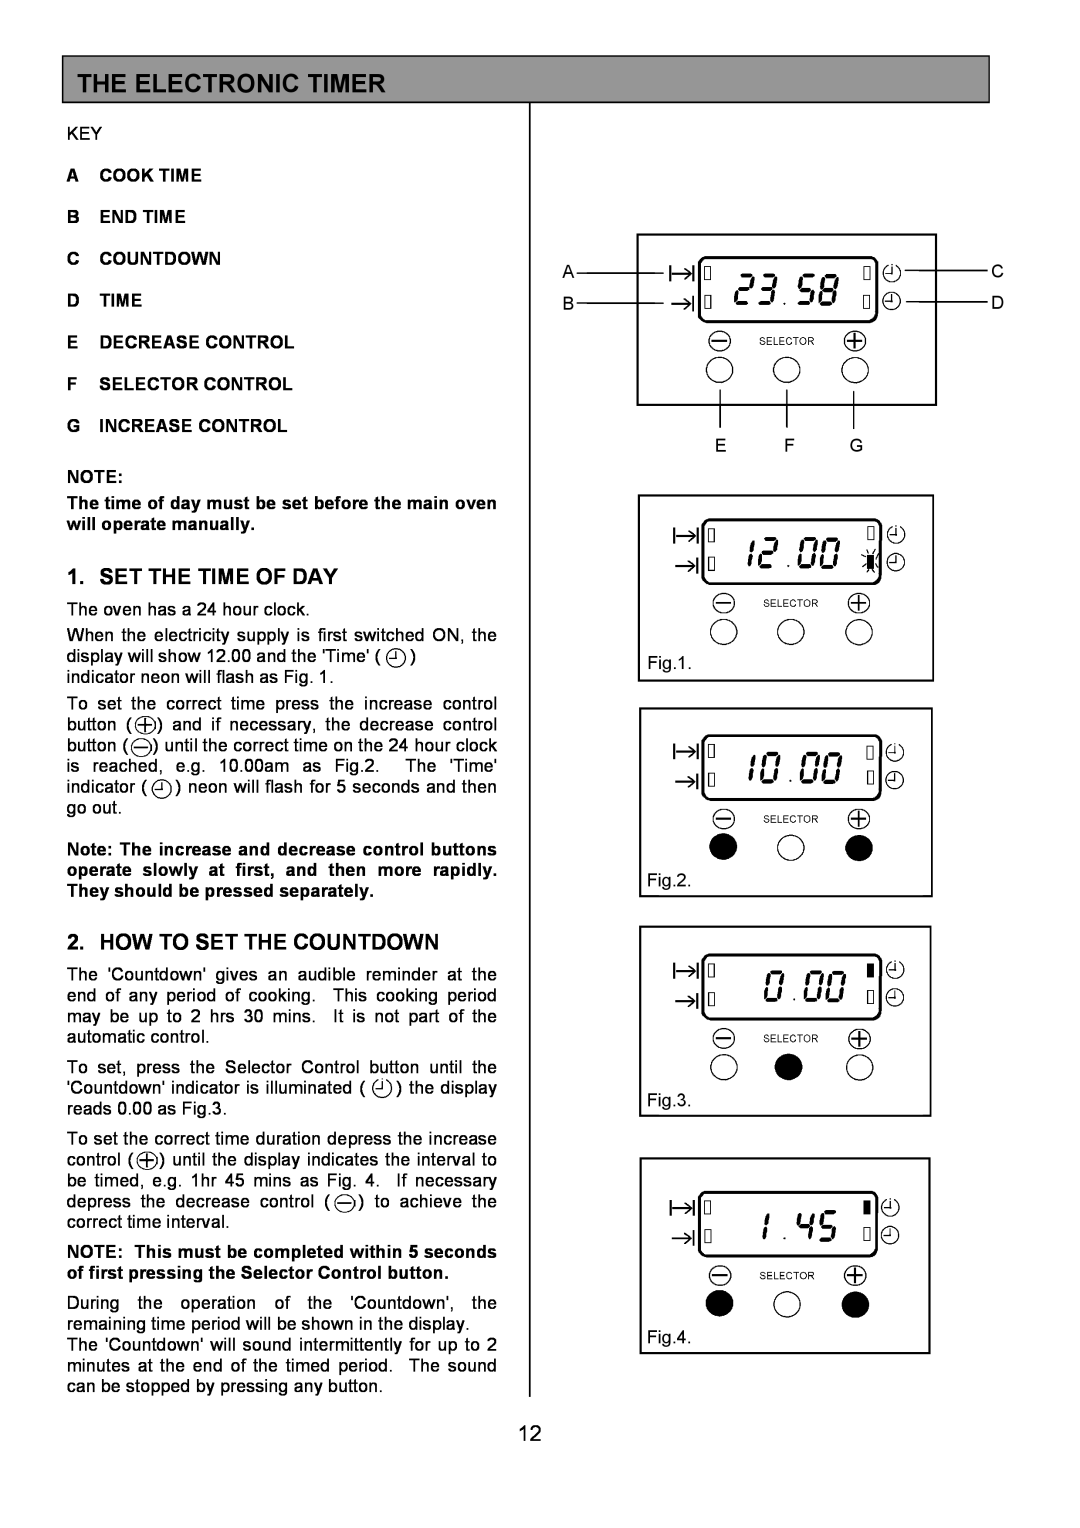 Tricity Bendix SIE555 installation instructions The Electronic Timer, Set The Time Of Day, How To Set The Countdown 